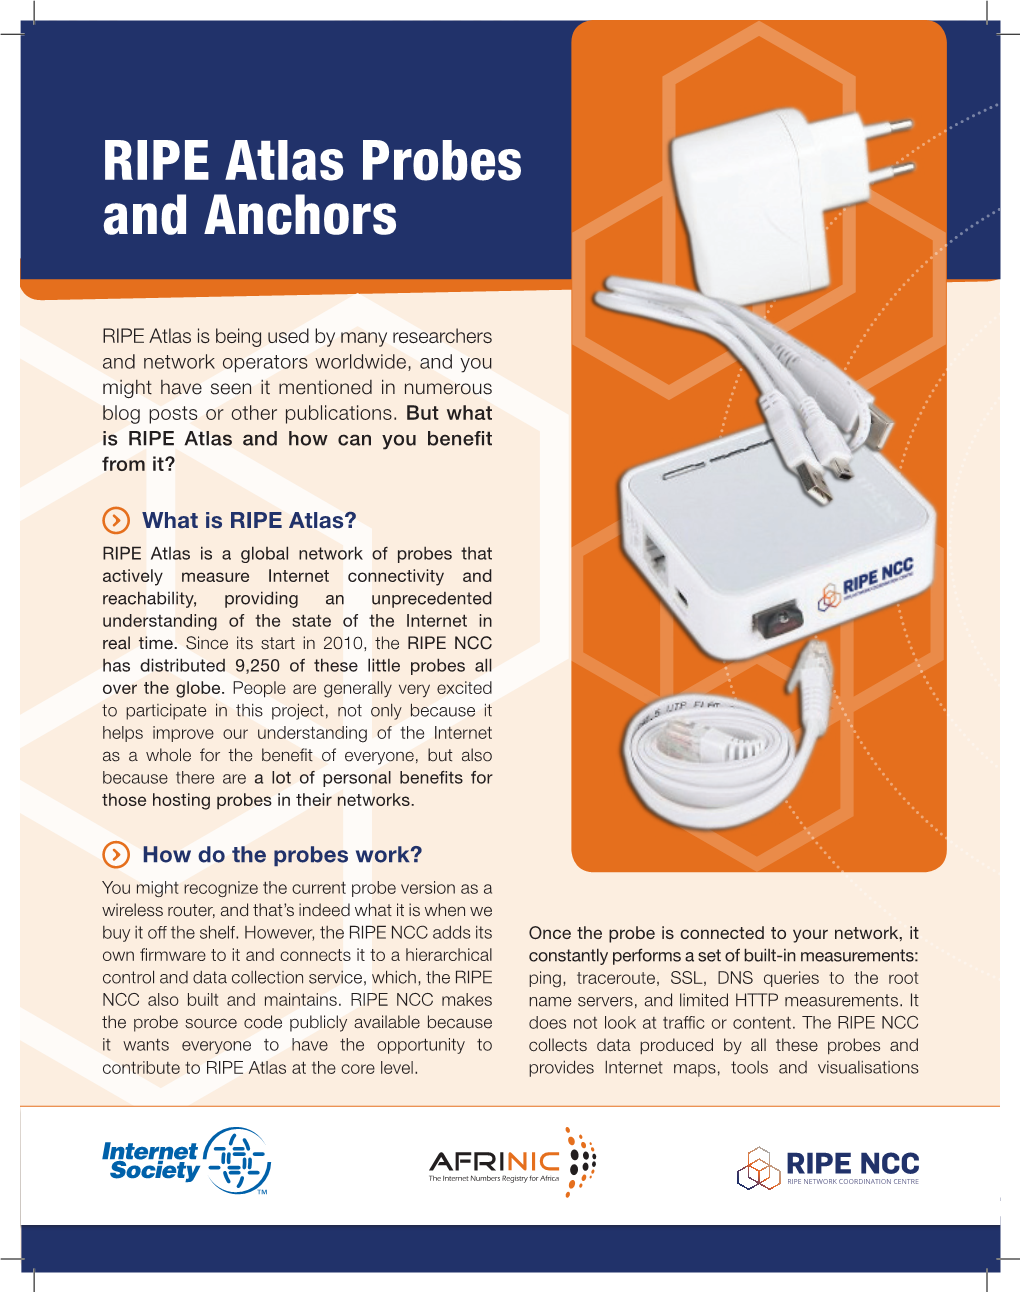 RIPE Atlas Probes and Anchors